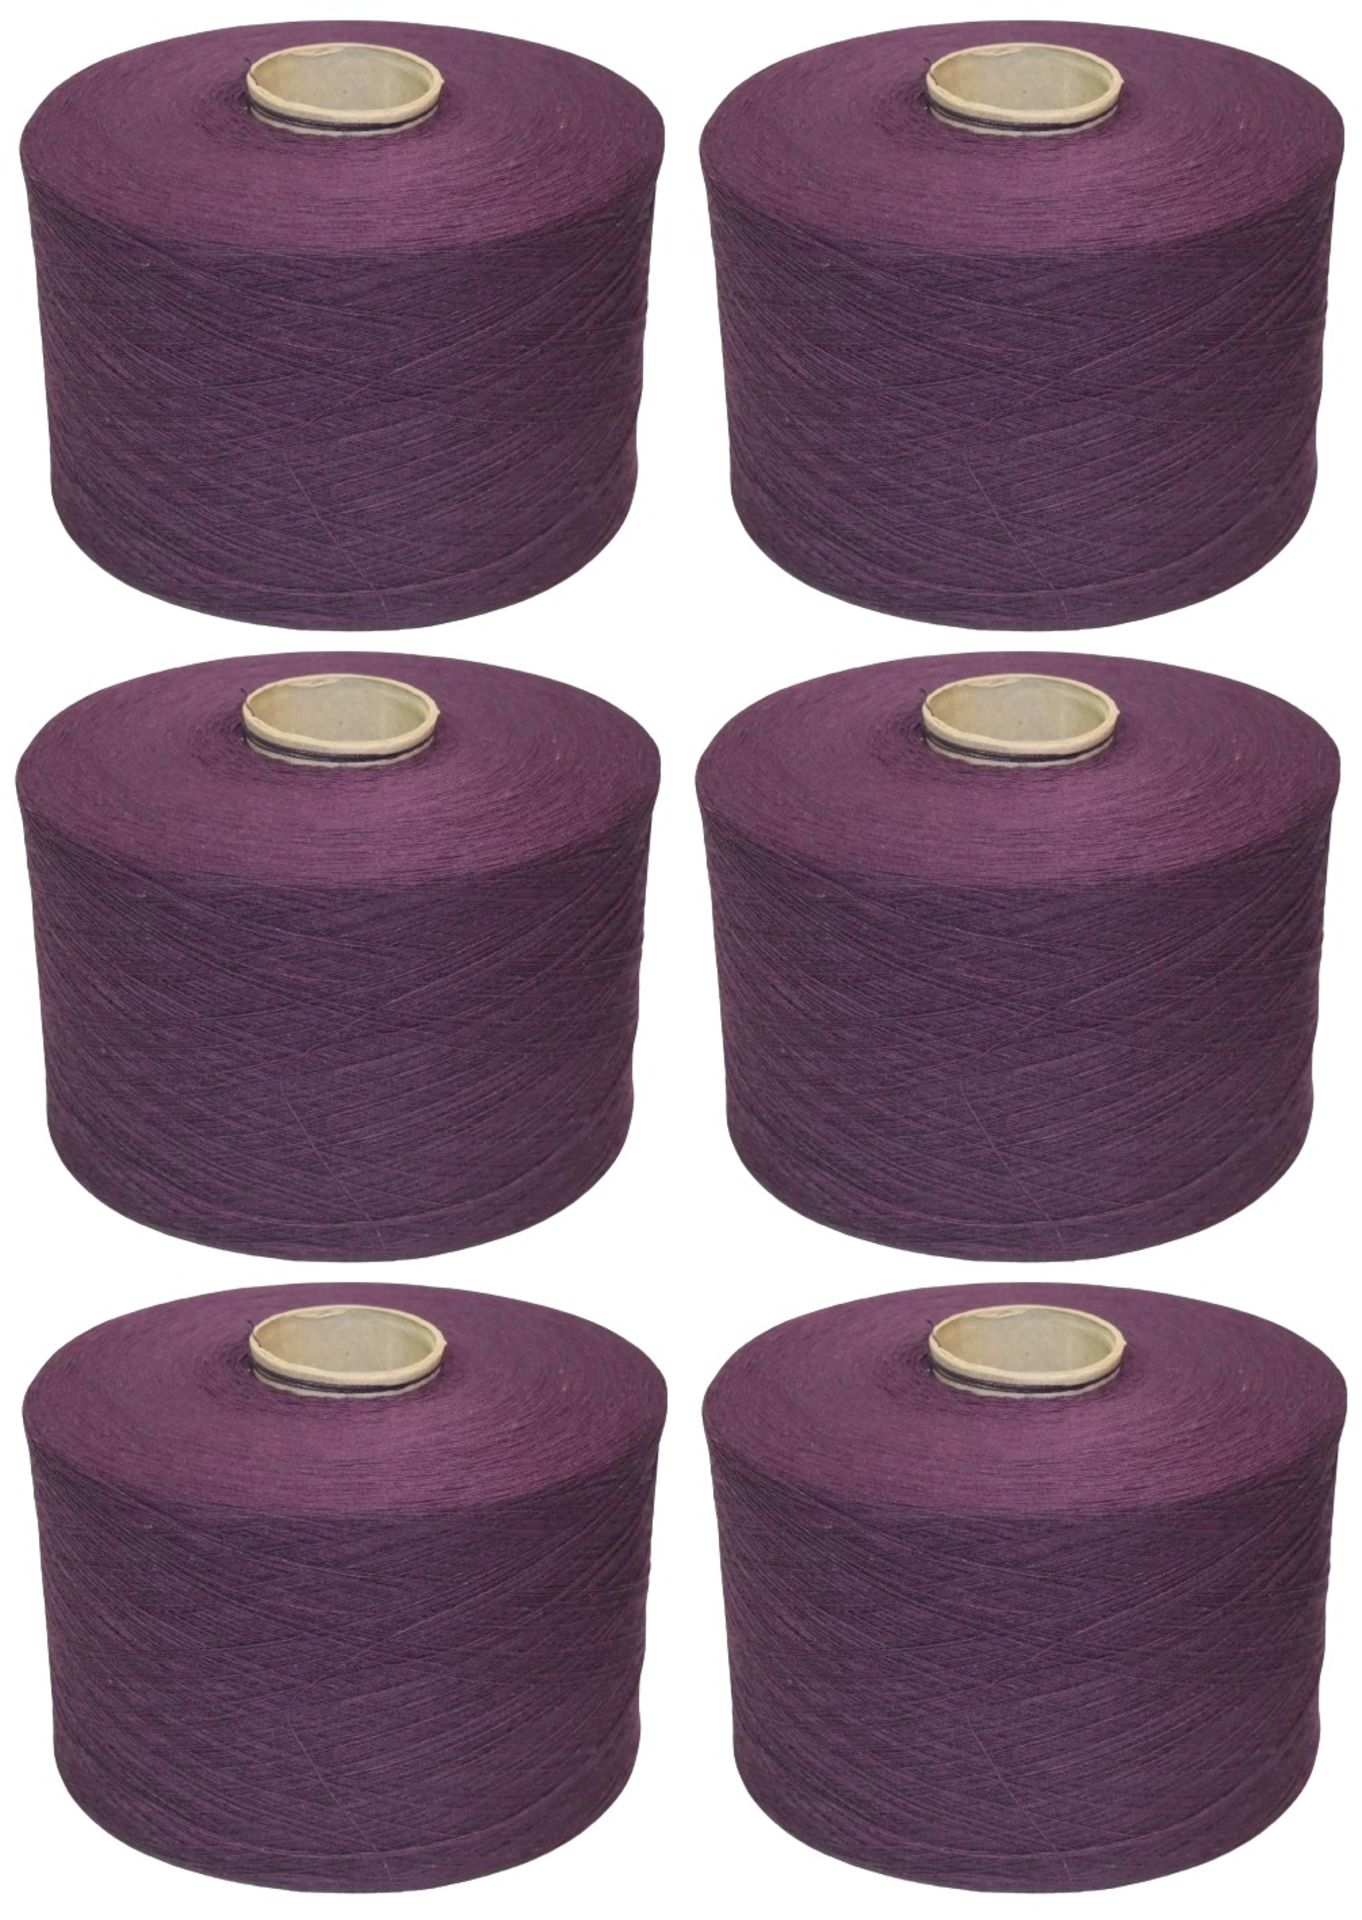 6 x Cones of 1/13 MicroCotton Knitting Yarn - Purple - Approx Weight: 2,300g - New Stock ABL Yarn - Image 4 of 15